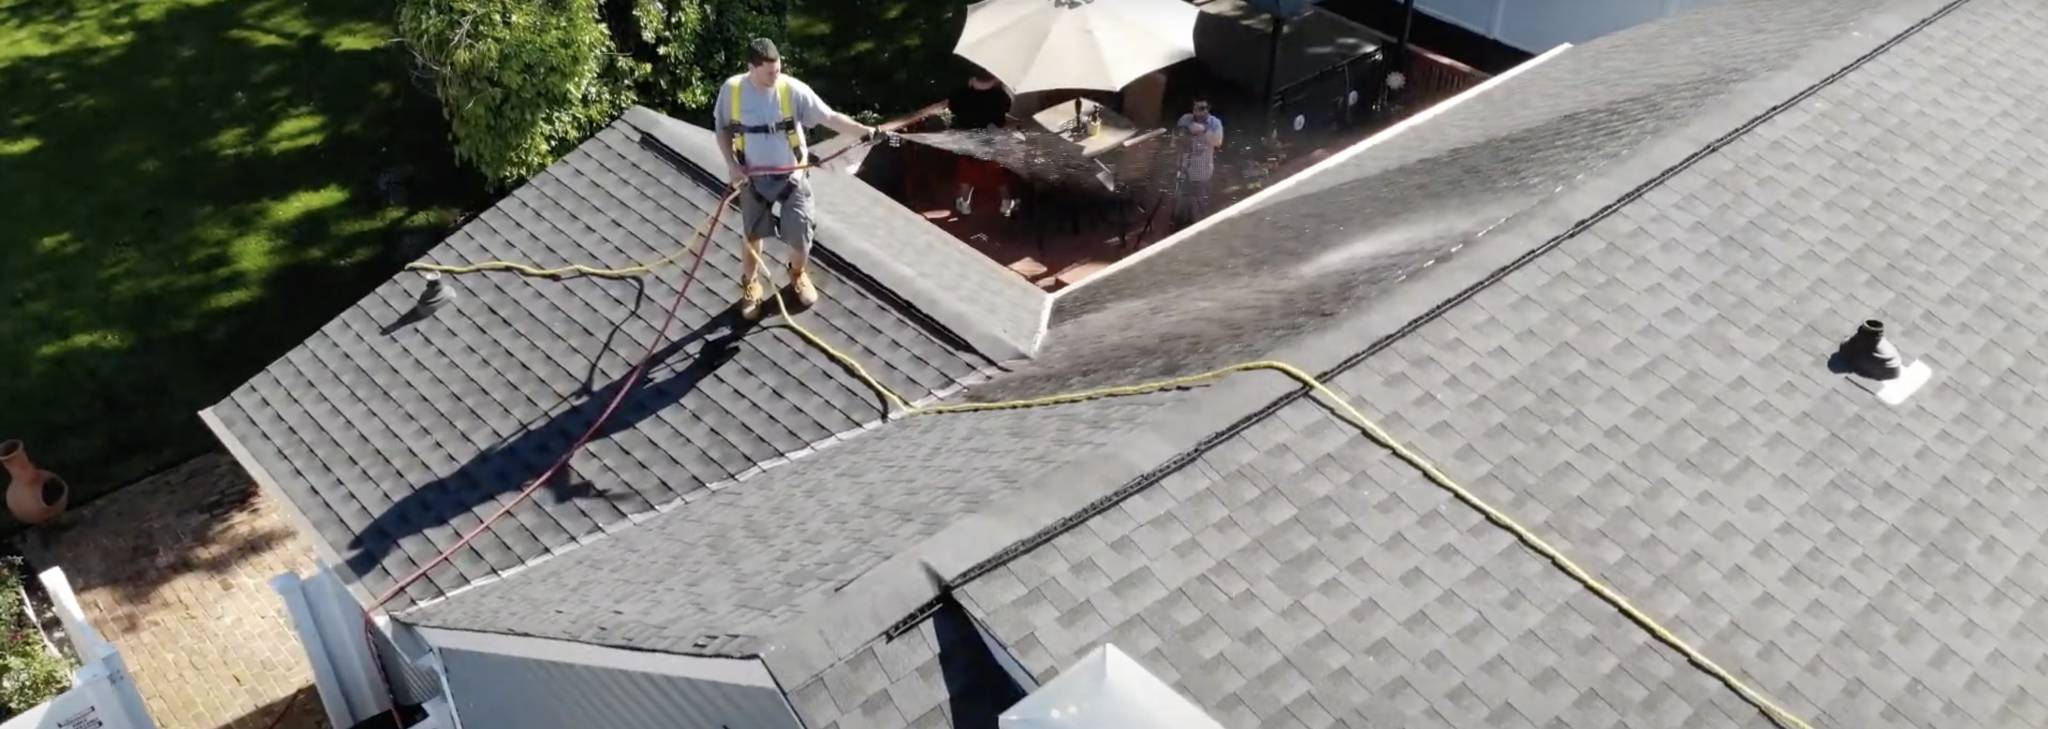 Pressure Wash Your Roof